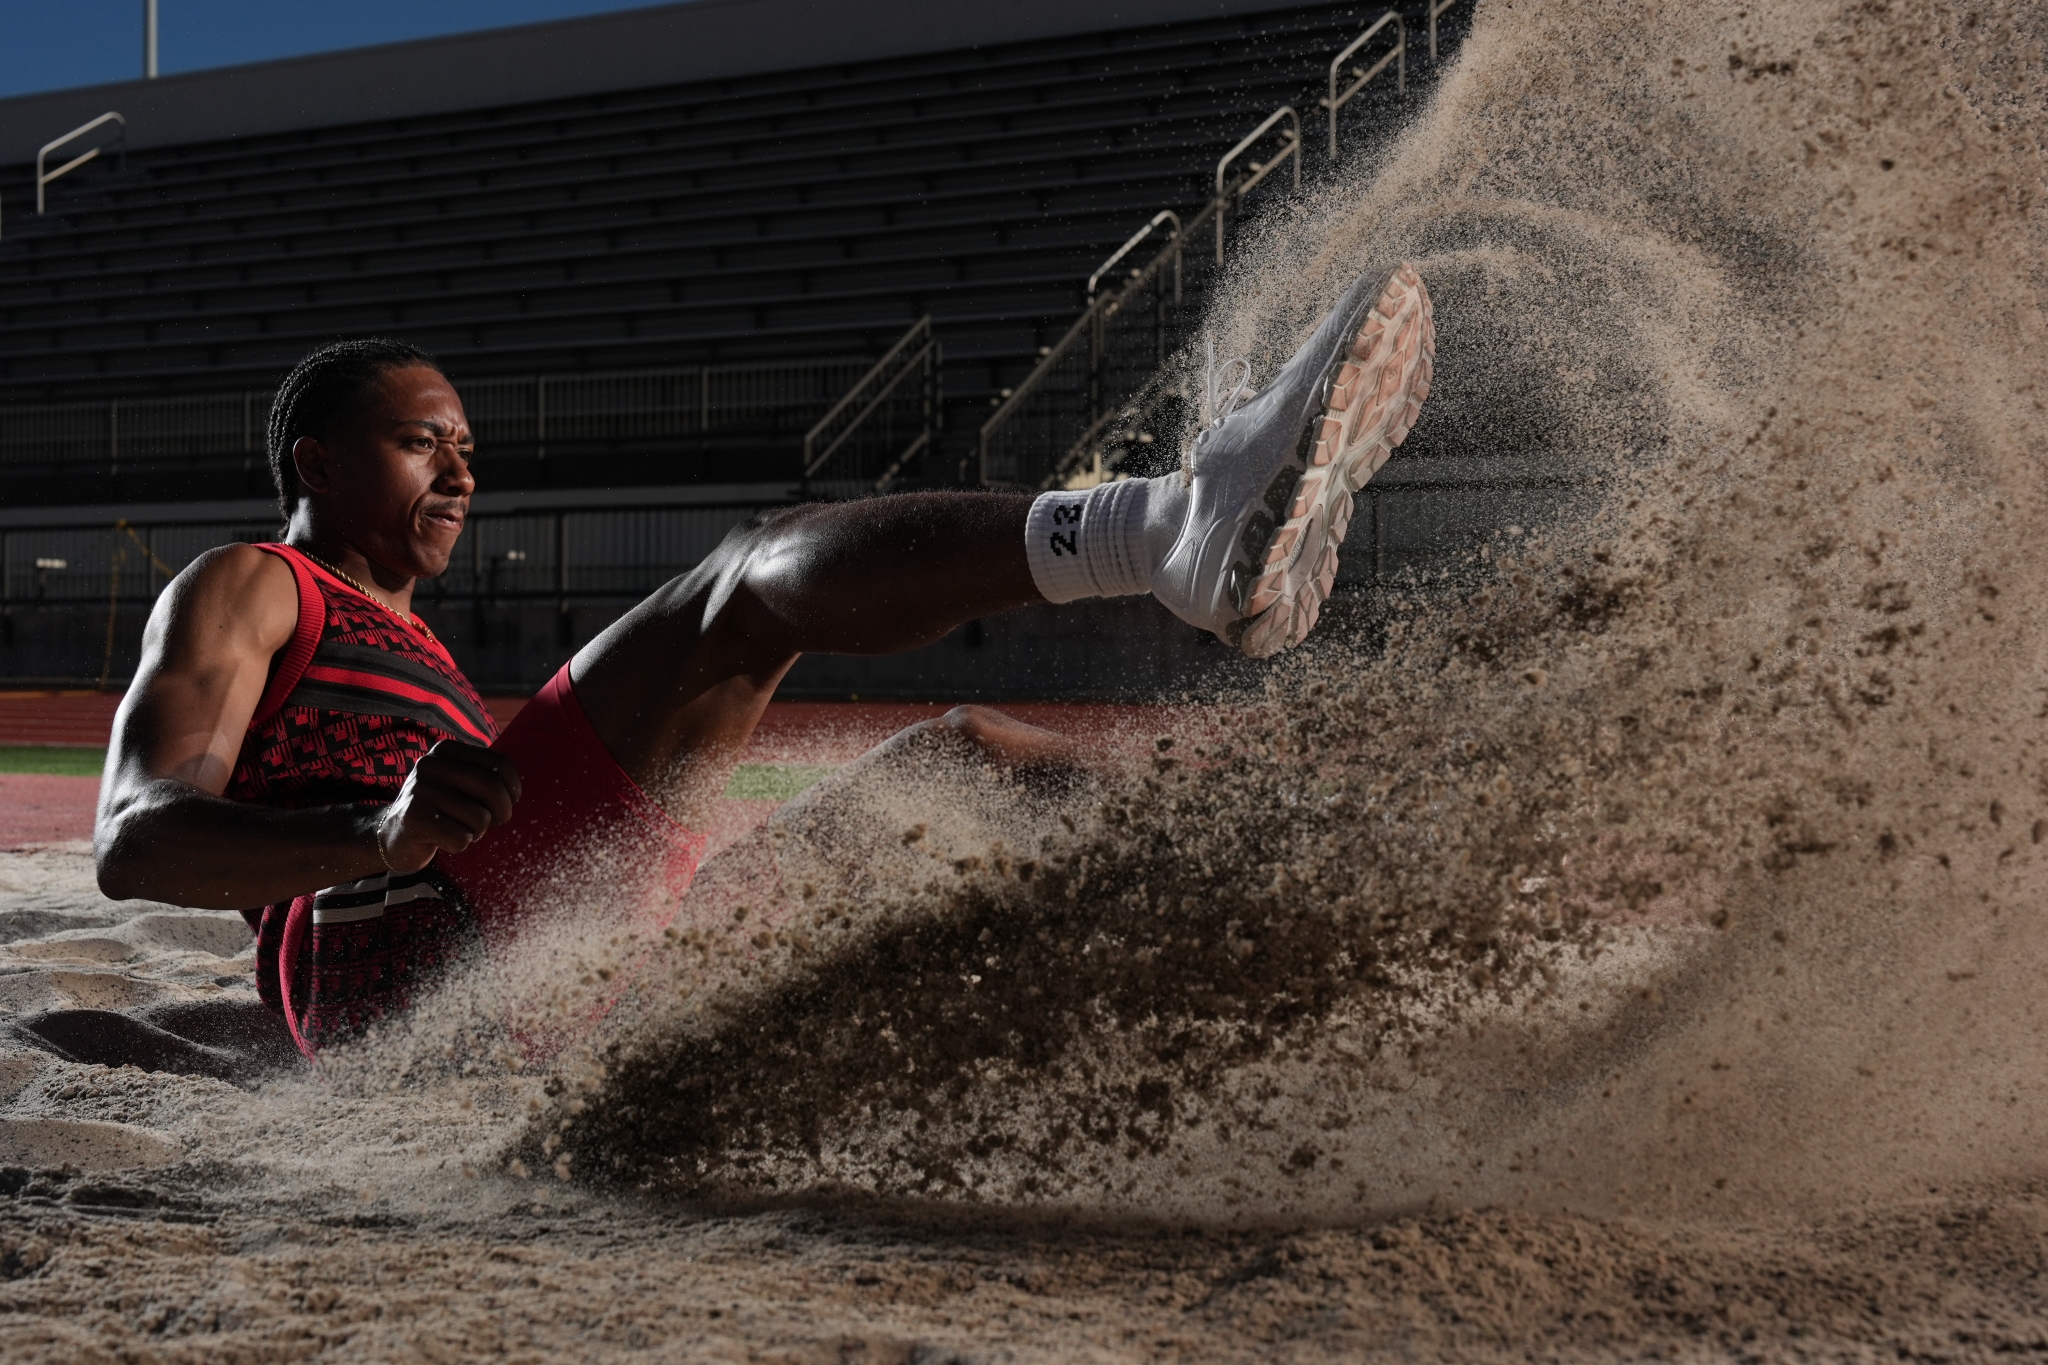 Male athlete skidding in the sand